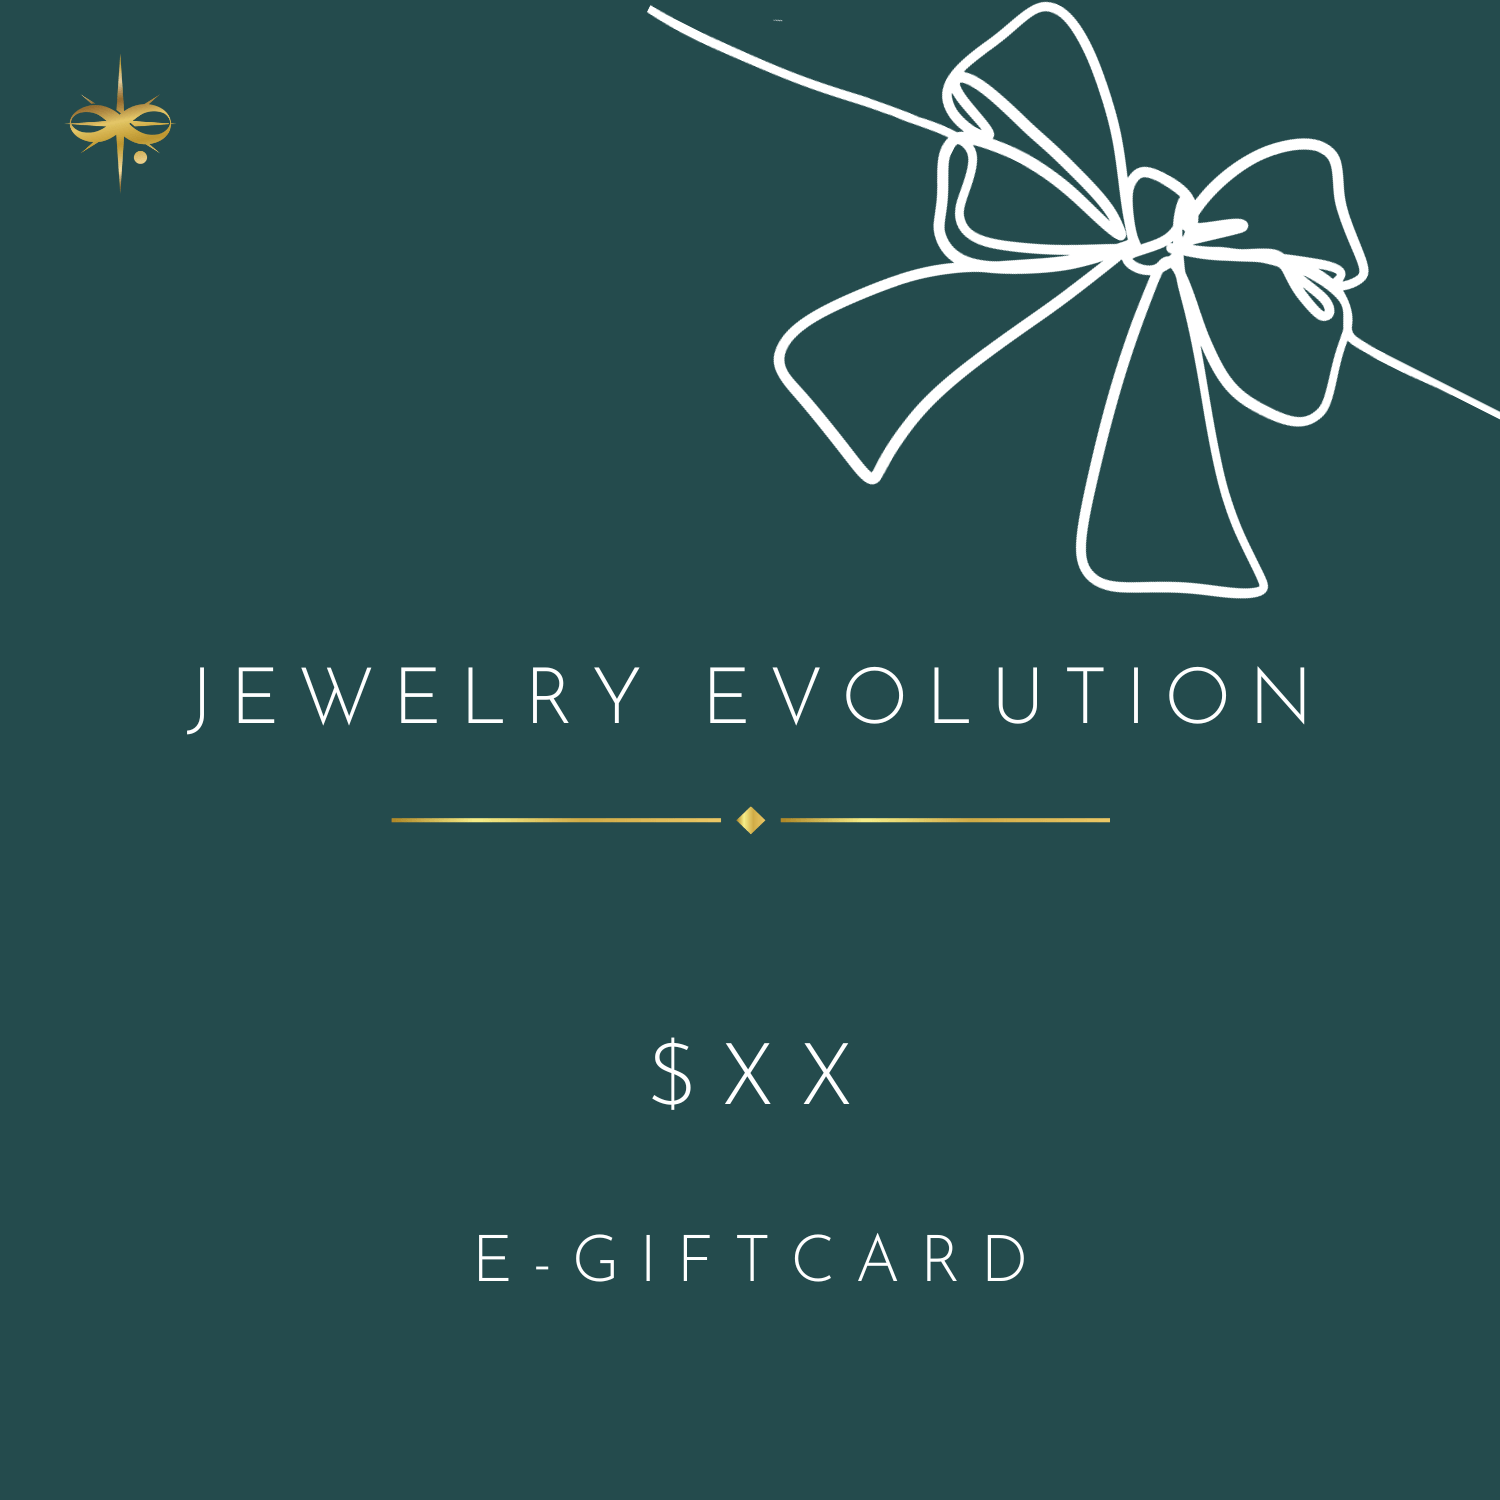 Jewelry Evolution Gift Card